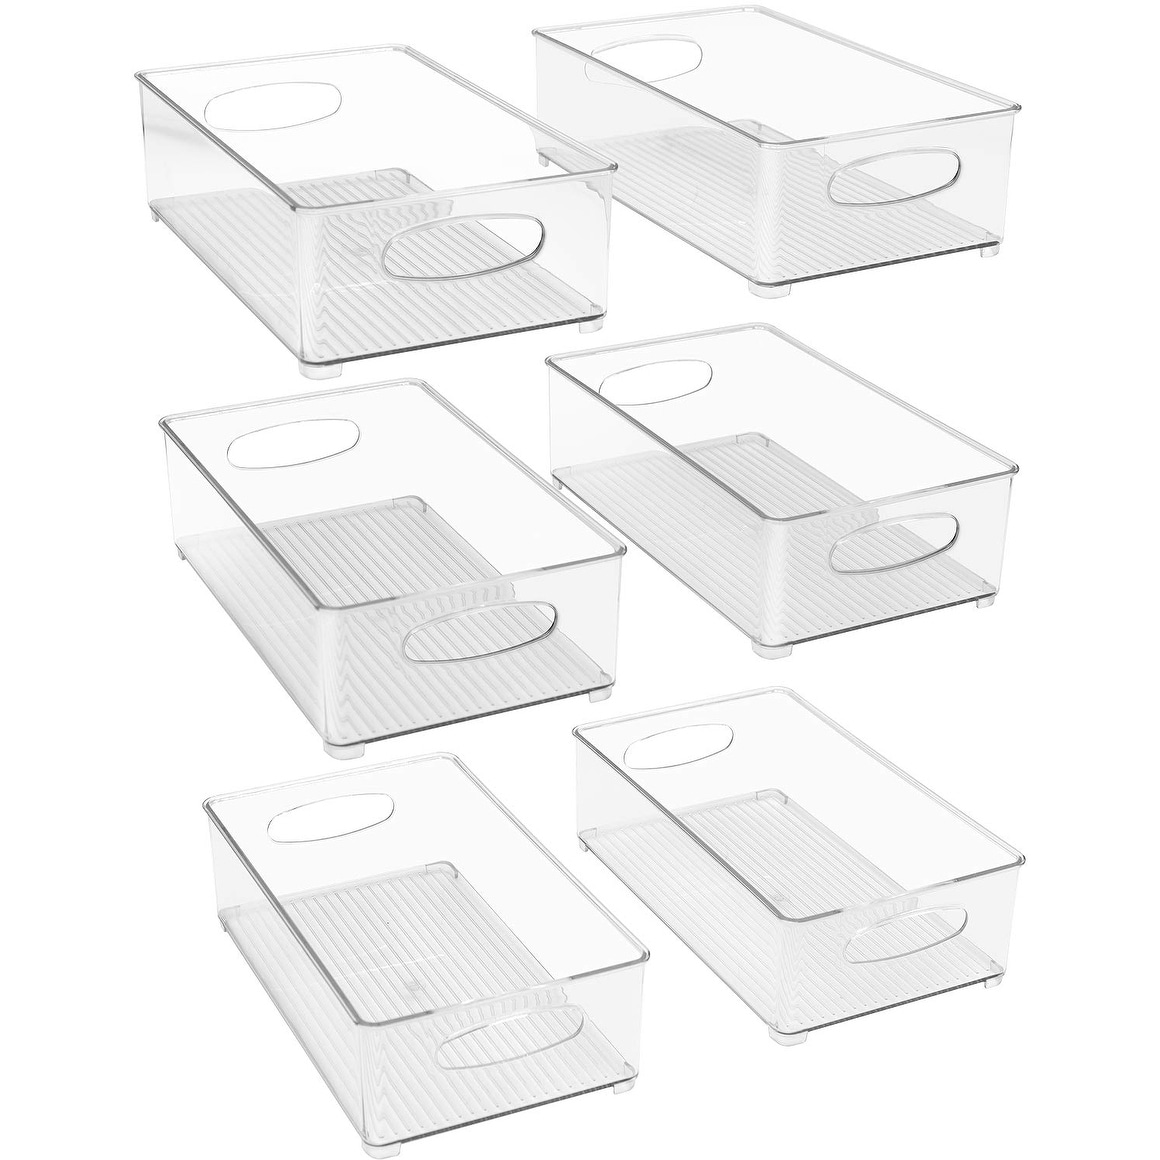 https://ak1.ostkcdn.com/images/products/is/images/direct/2548f626e8dd4f16210ce08e77f8306b4522c2e8/Plastic-Storage-Bins-Stackable-Clear-Pantry-Organizer-Box-Containers.jpg